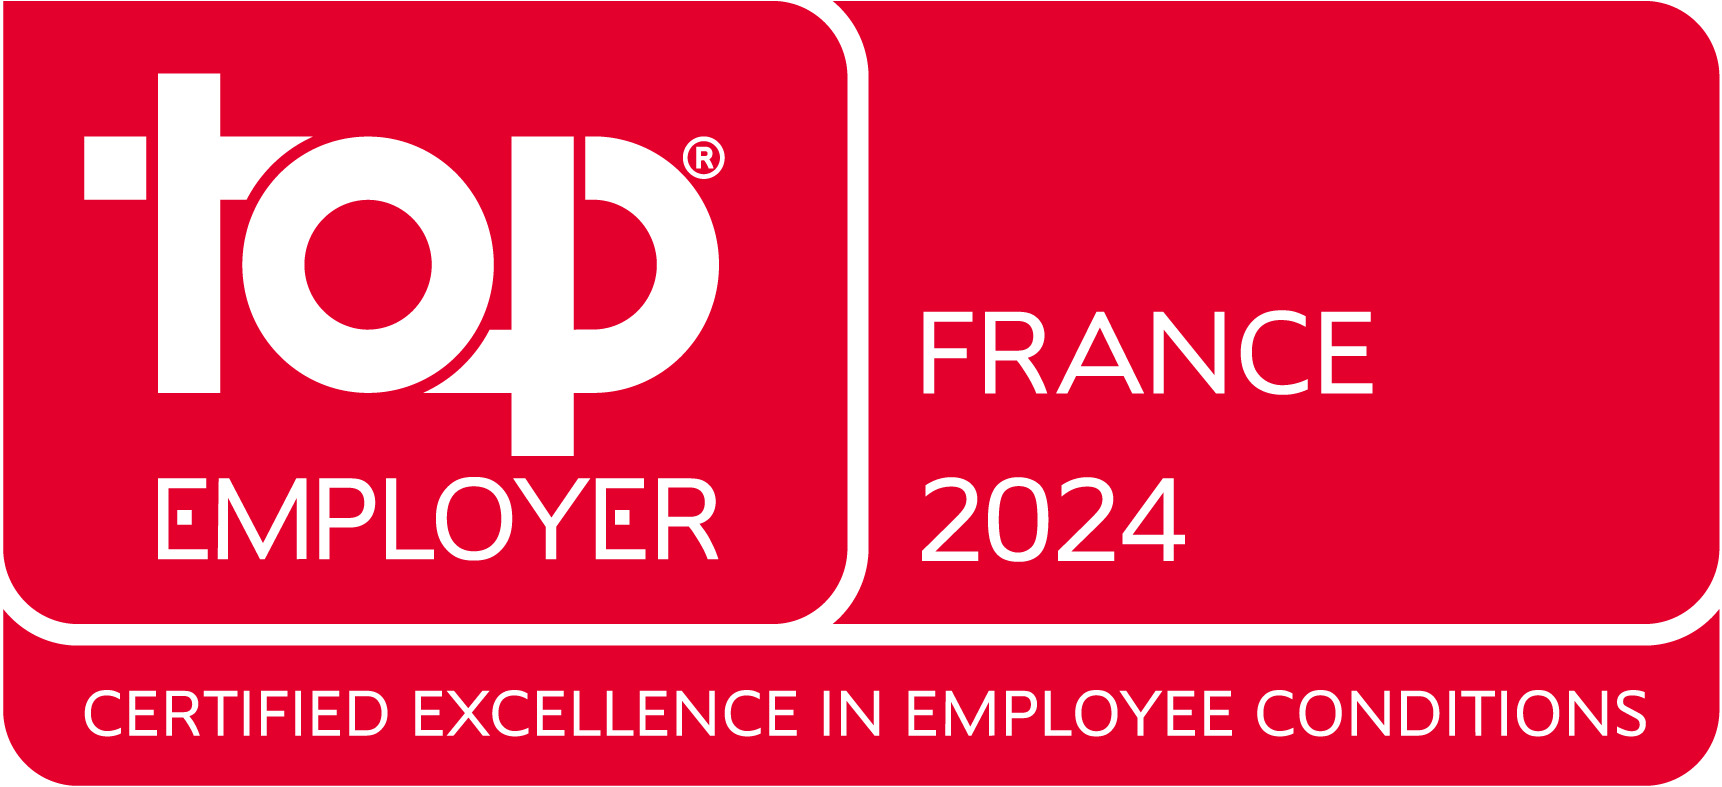 Top_Employer_France_2024